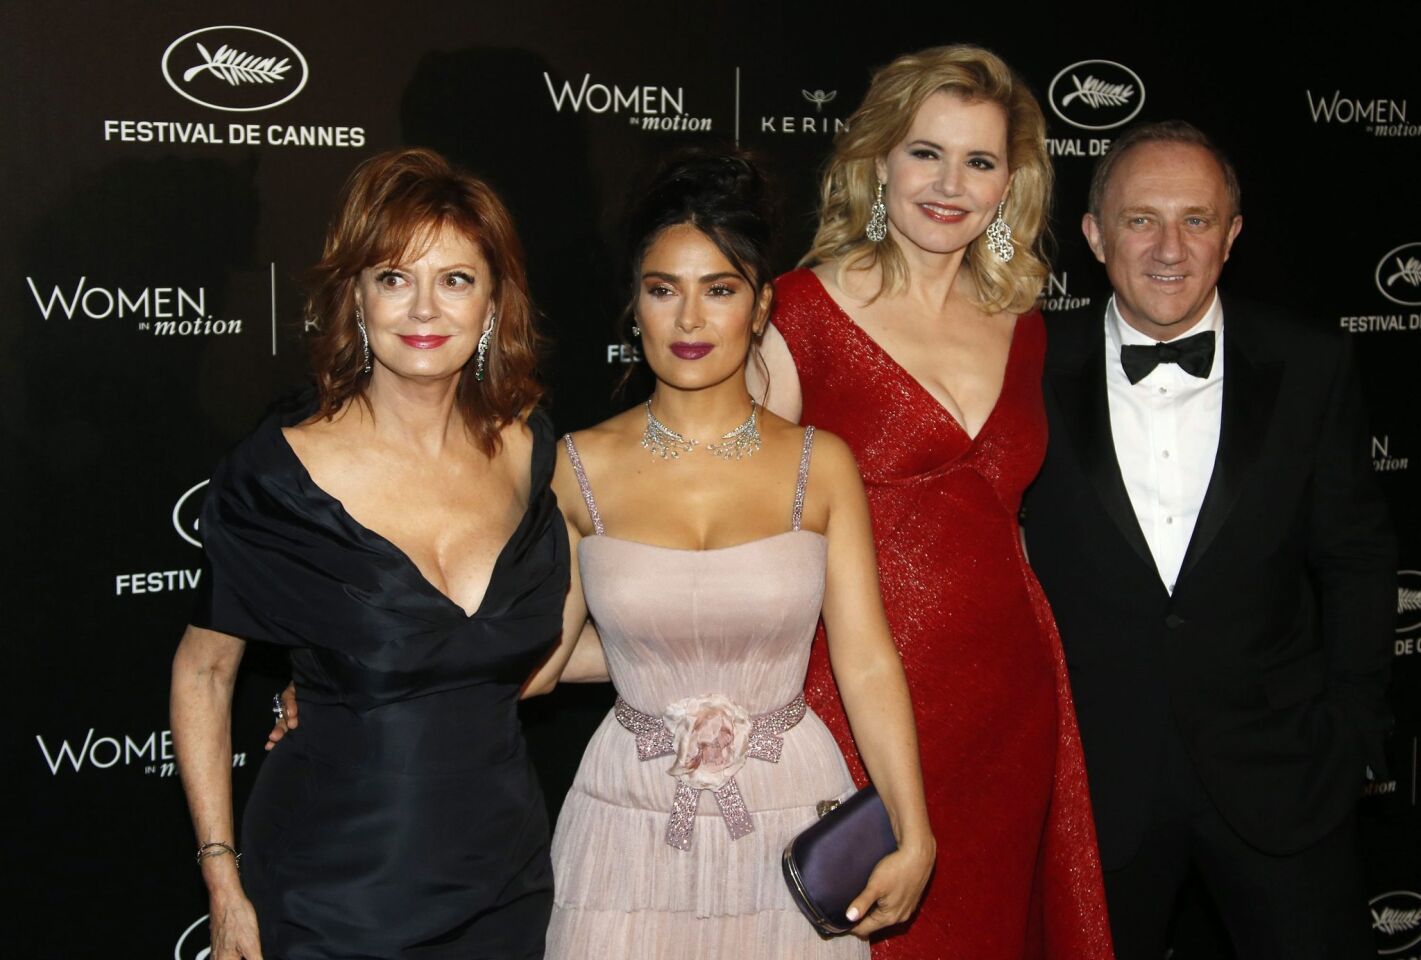 Susan Sarandon, from left, Salma Hayek, Geena Davis and Kering CEO Francois-Henri Pinault arrive for the Kering Women in Motion Honor Awards during the 69th Cannes Film Festival.